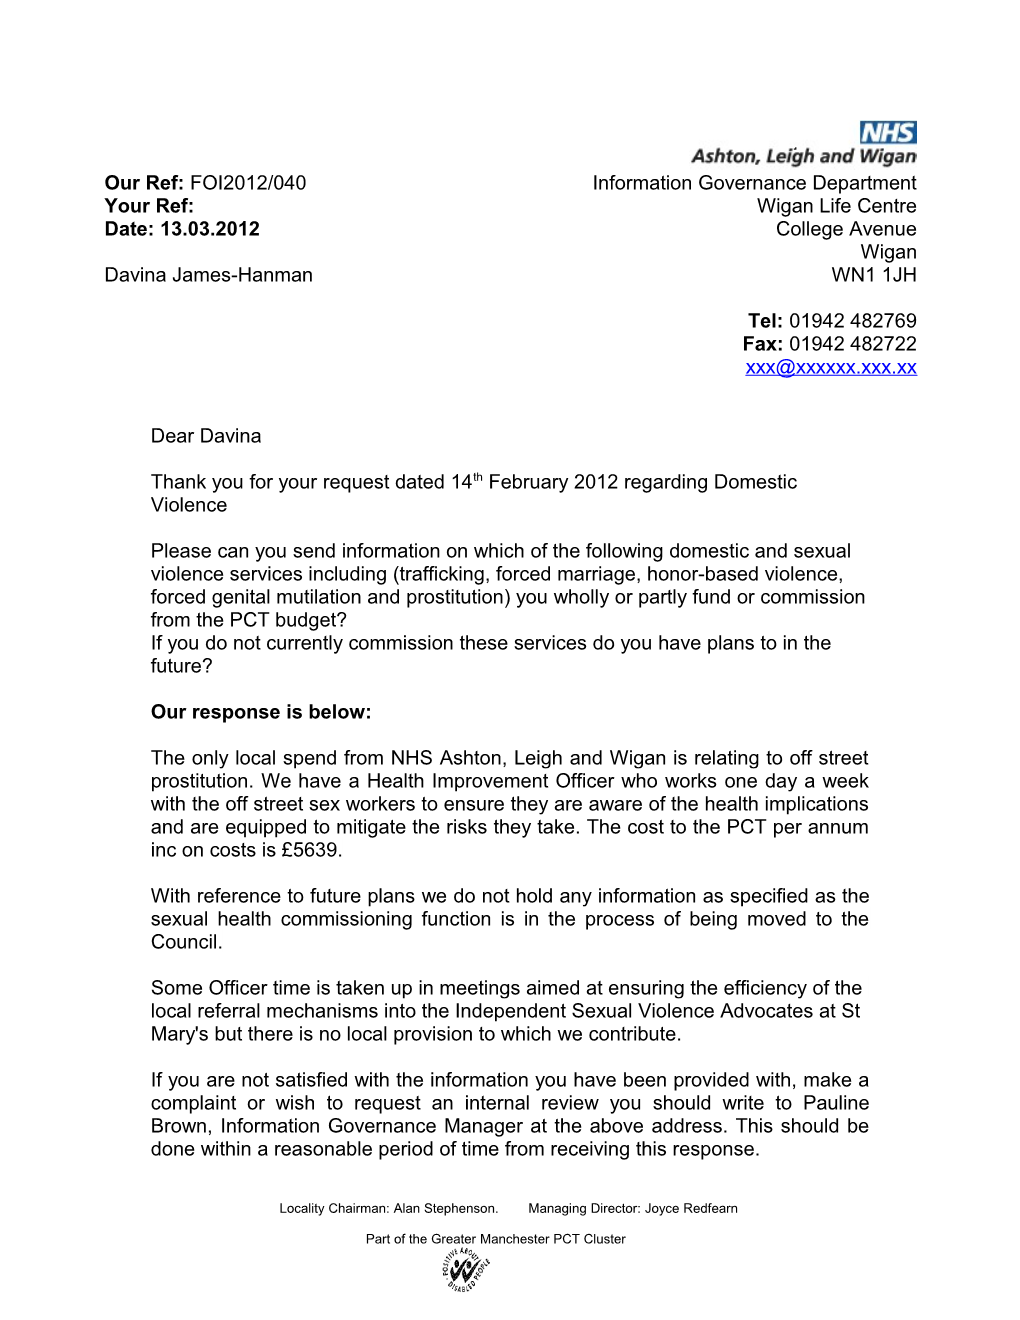 Thank You for Your Request Dated 14Th February 2012 Regarding Domestic Violence